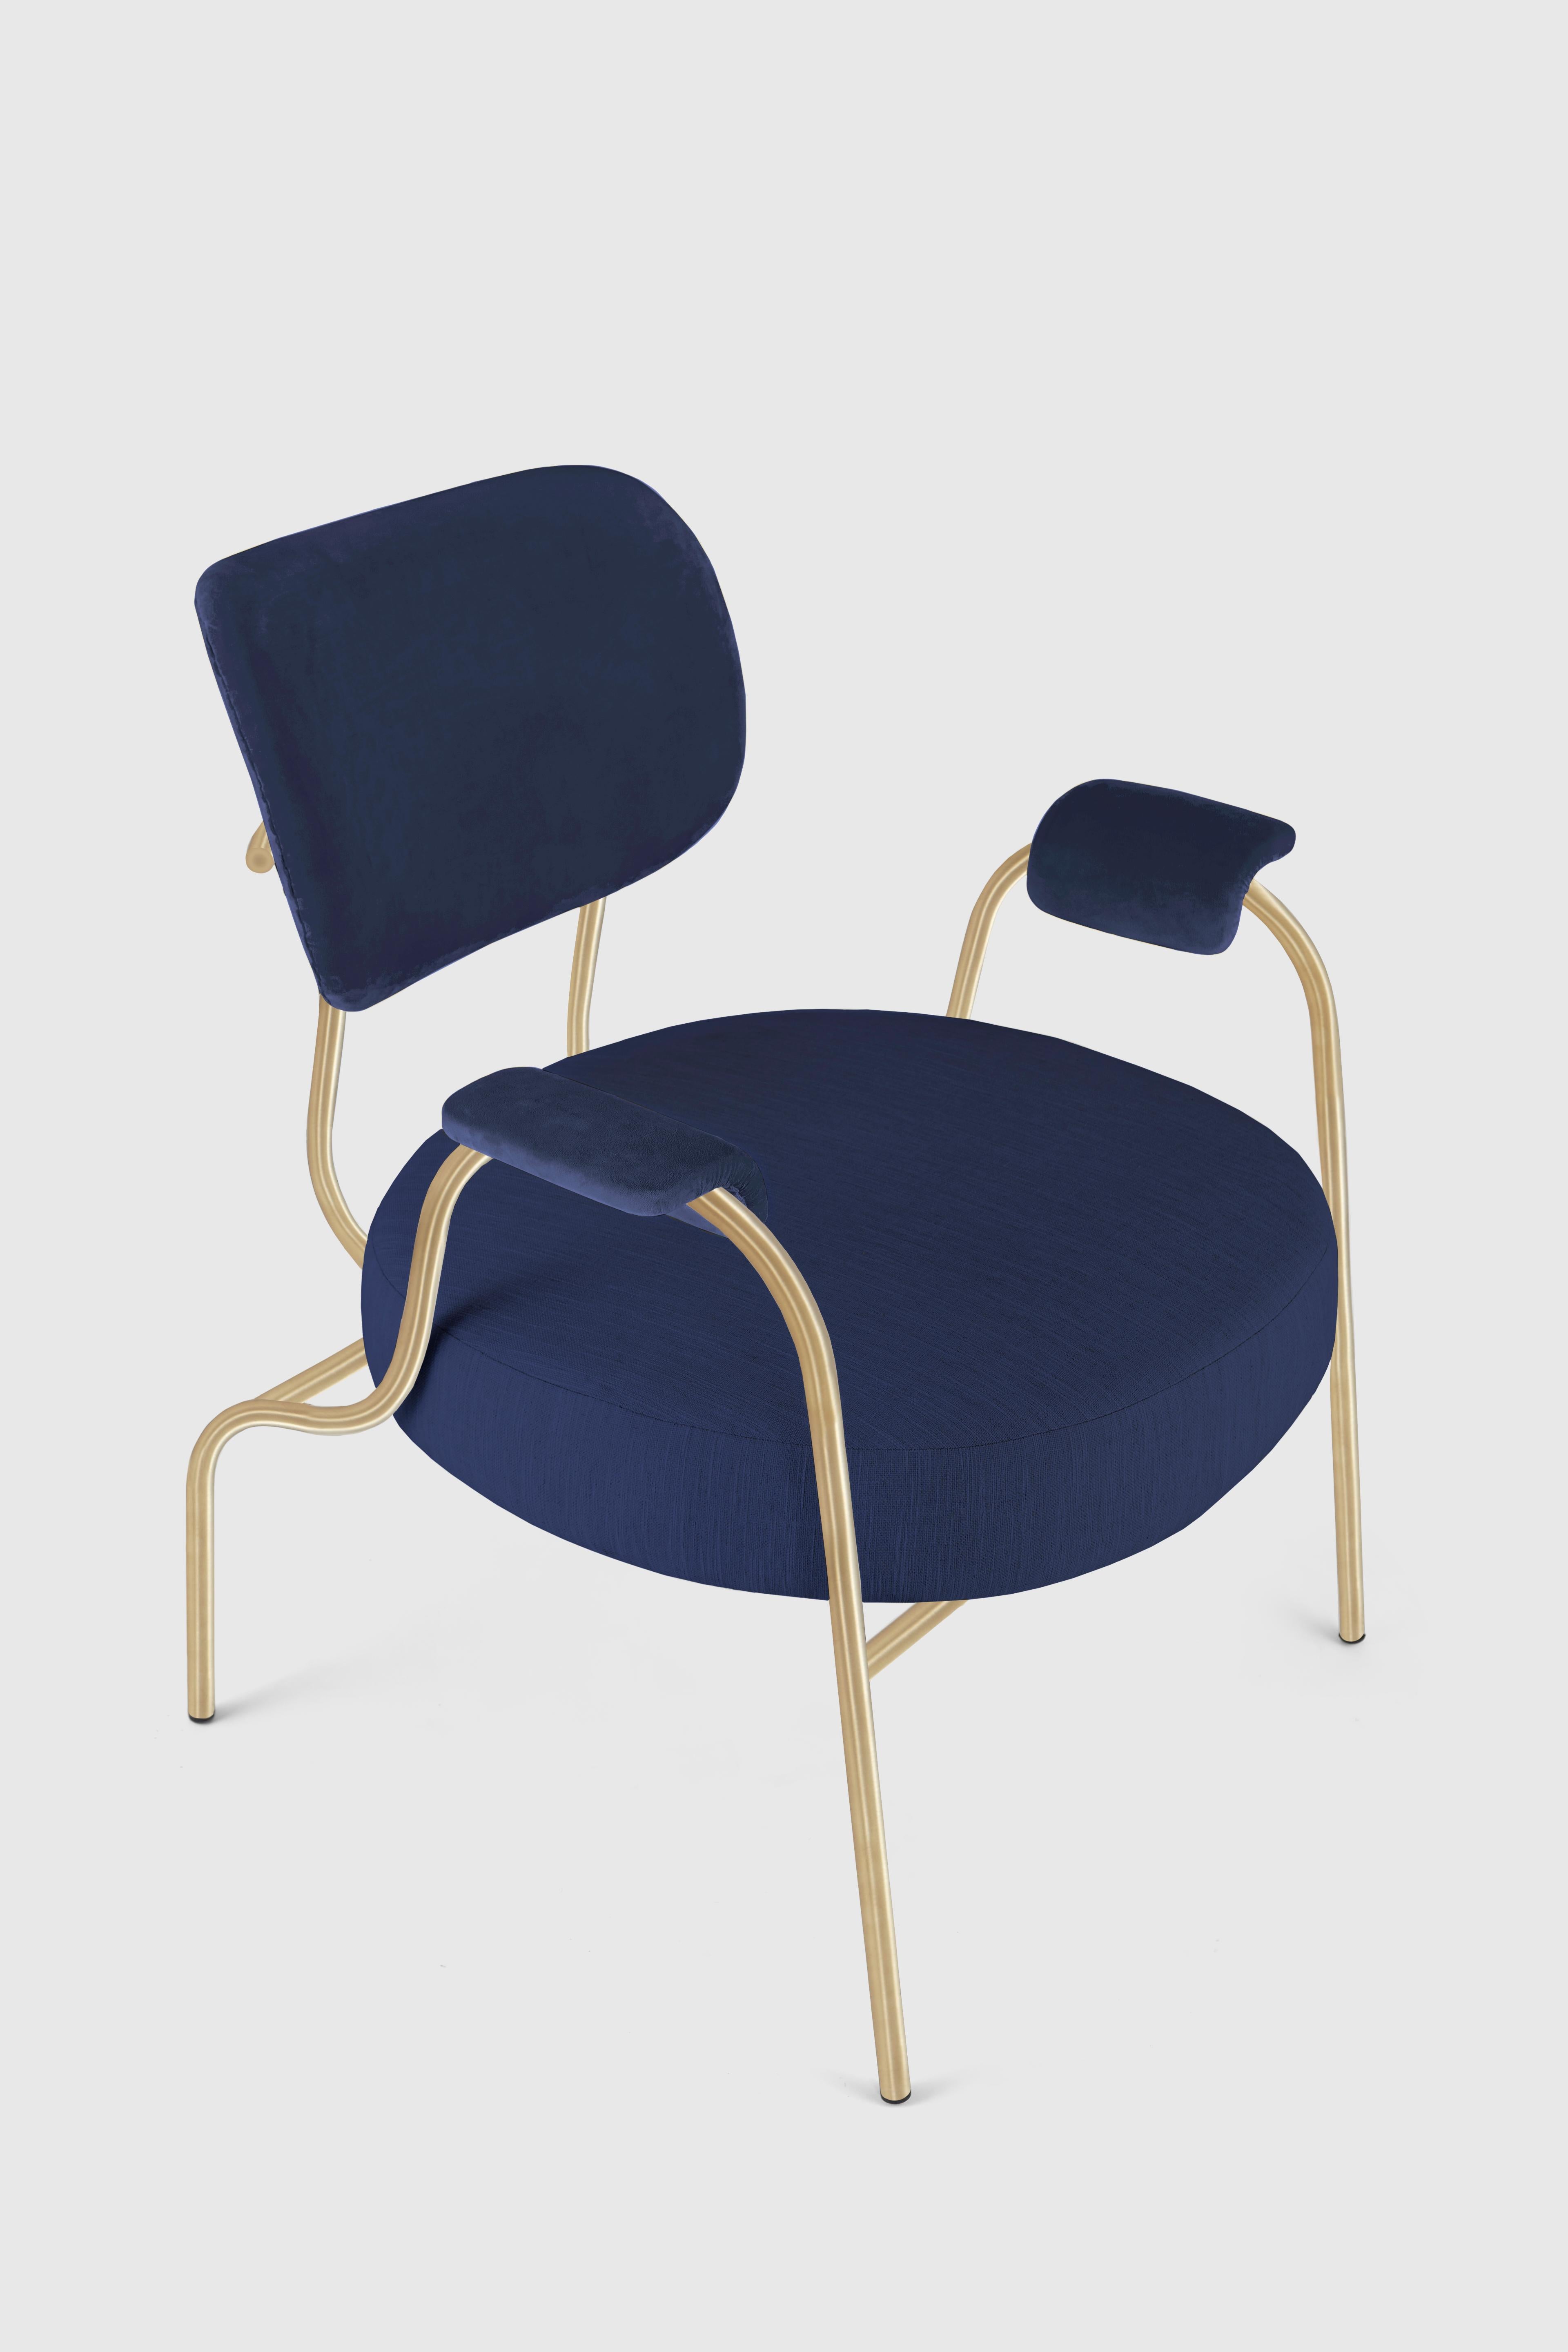 Unique nami chair by Hatsu.
Dimensions: D 50 x W 57 x H 65 cm.
Materials: uphostered seating on powder coated steel frame.

Hatsu is a design studio based in Mumbai that creates modern lighting that are unique and immediately recognisable. We